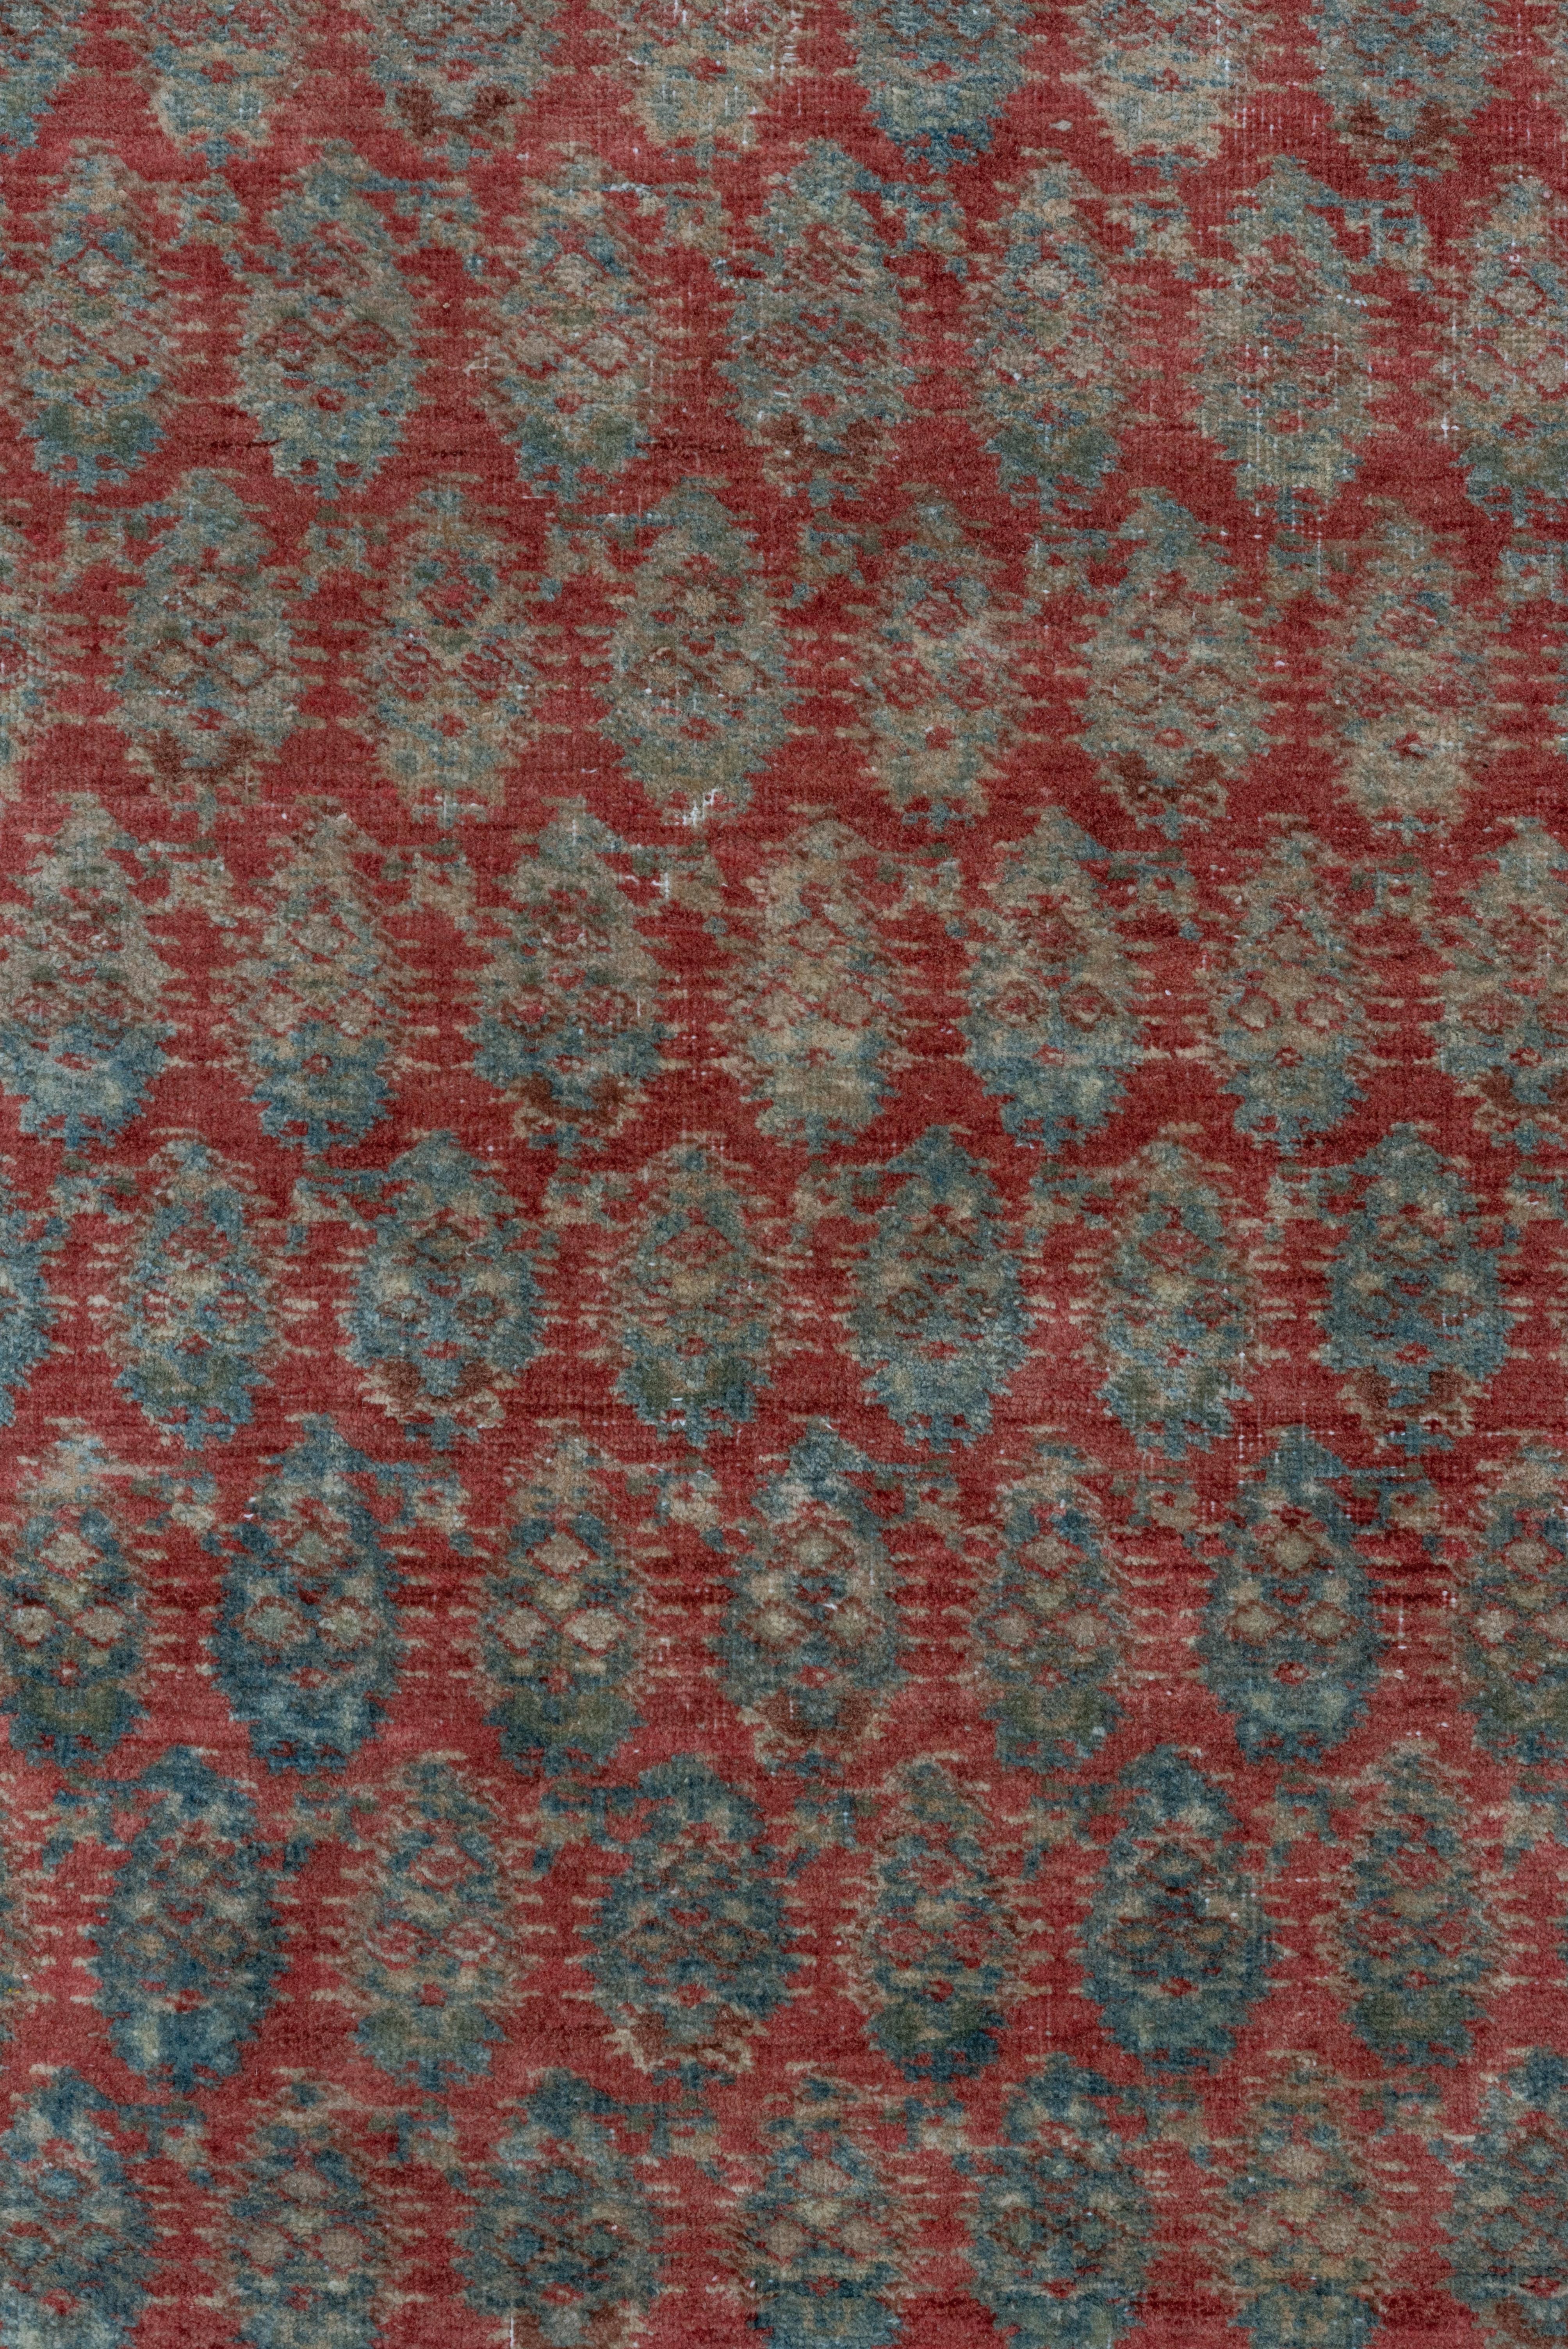 Antique Turkish Sivas Rug, Saraband Design, Red and Blue Tones, circa 1920s In Good Condition For Sale In New York, NY